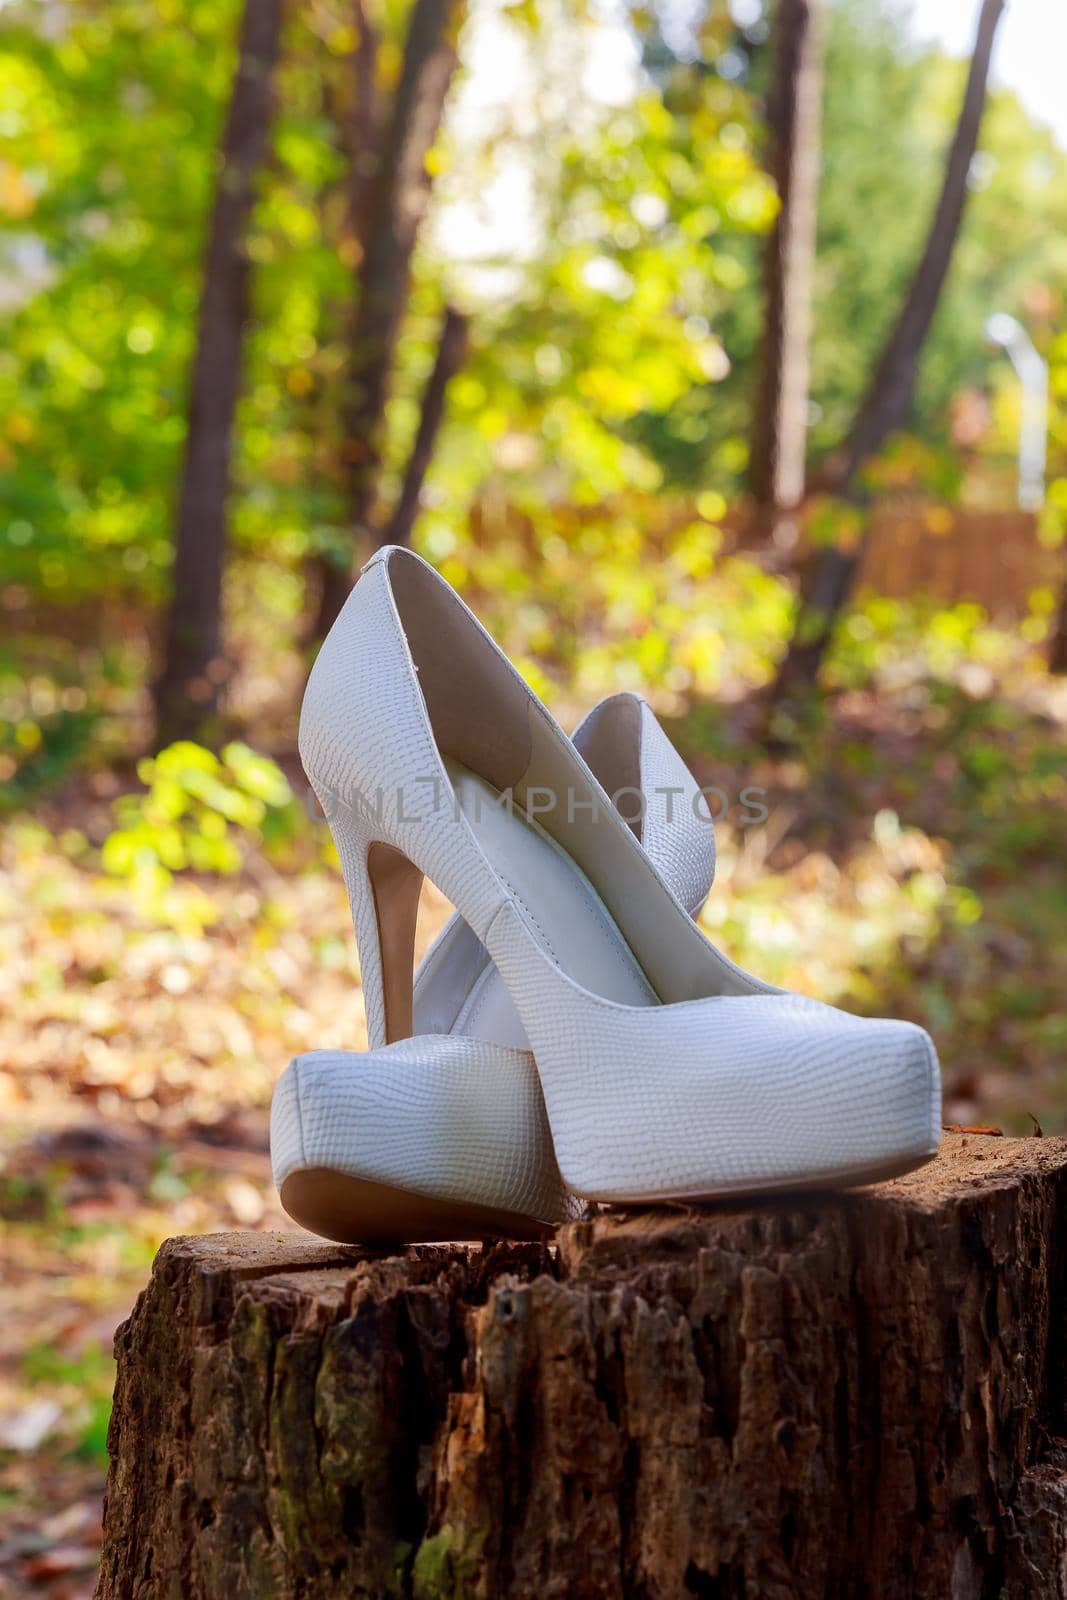 The beautiful shoes of the bride with flowers on the side.